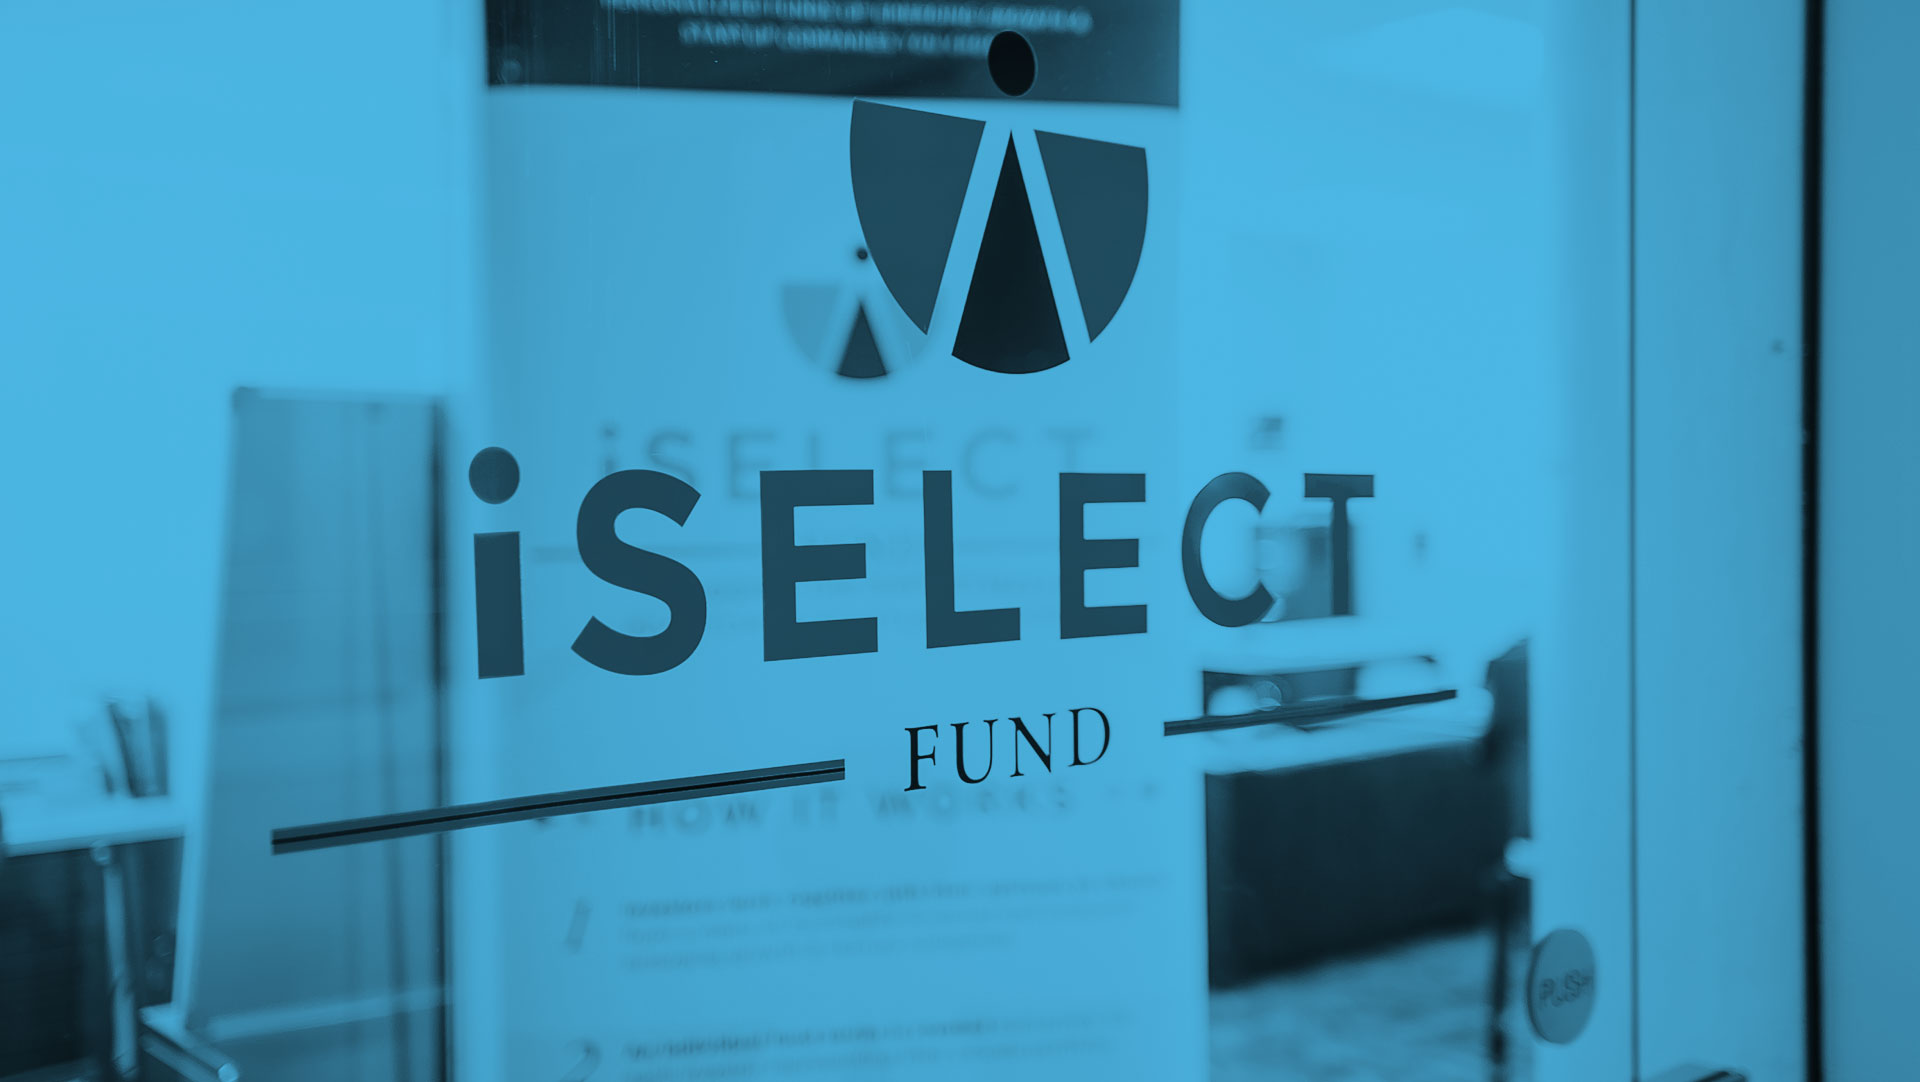 iSelect Fund